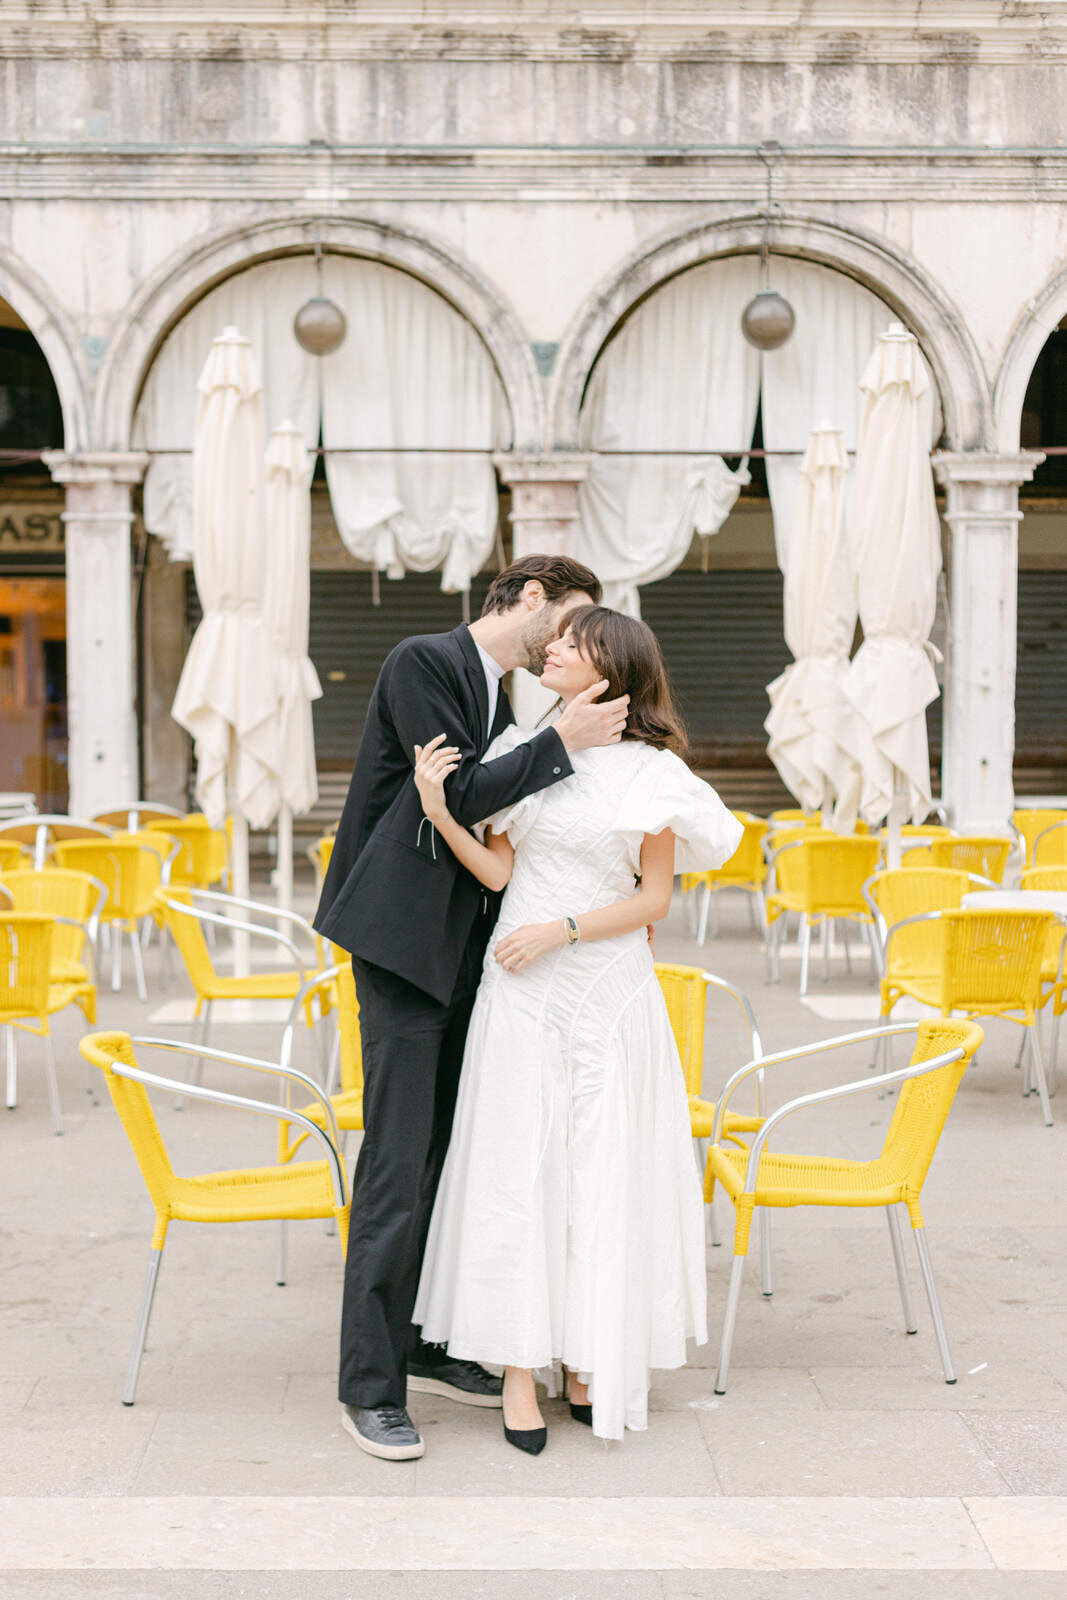 engagement session at Piazza San Marco in Venice, Italy